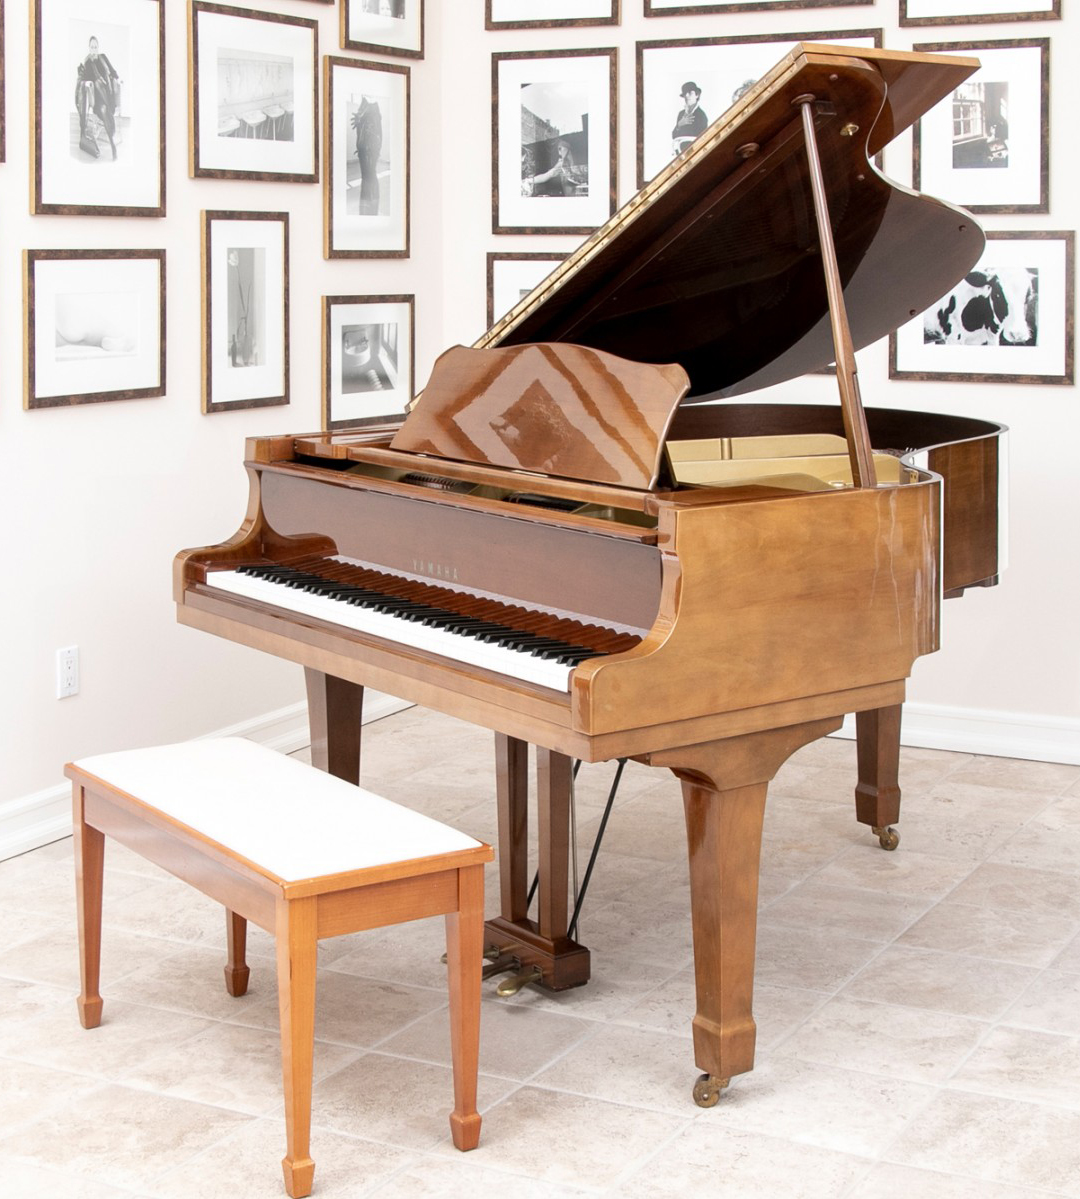 Yamaha G2 Grand Piano for the music lover